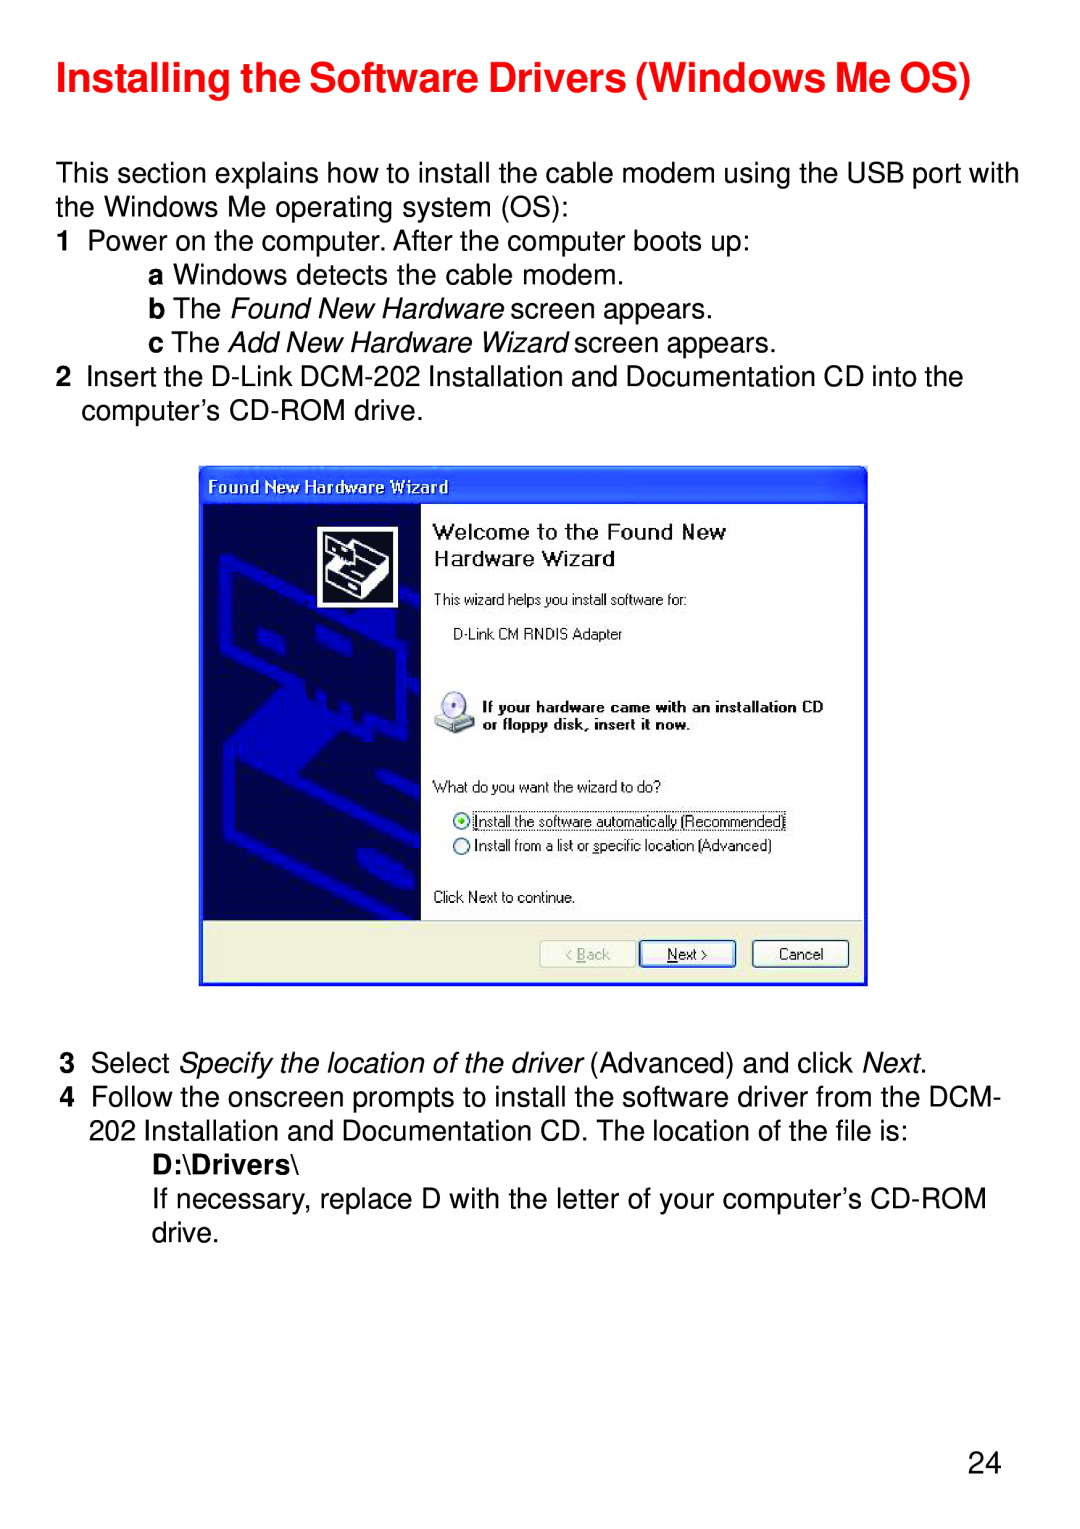 D-Link DCM-202 Installing the Software Drivers Windows Me OS, c The Add New Hardware Wizard screen appears, D\Drivers 